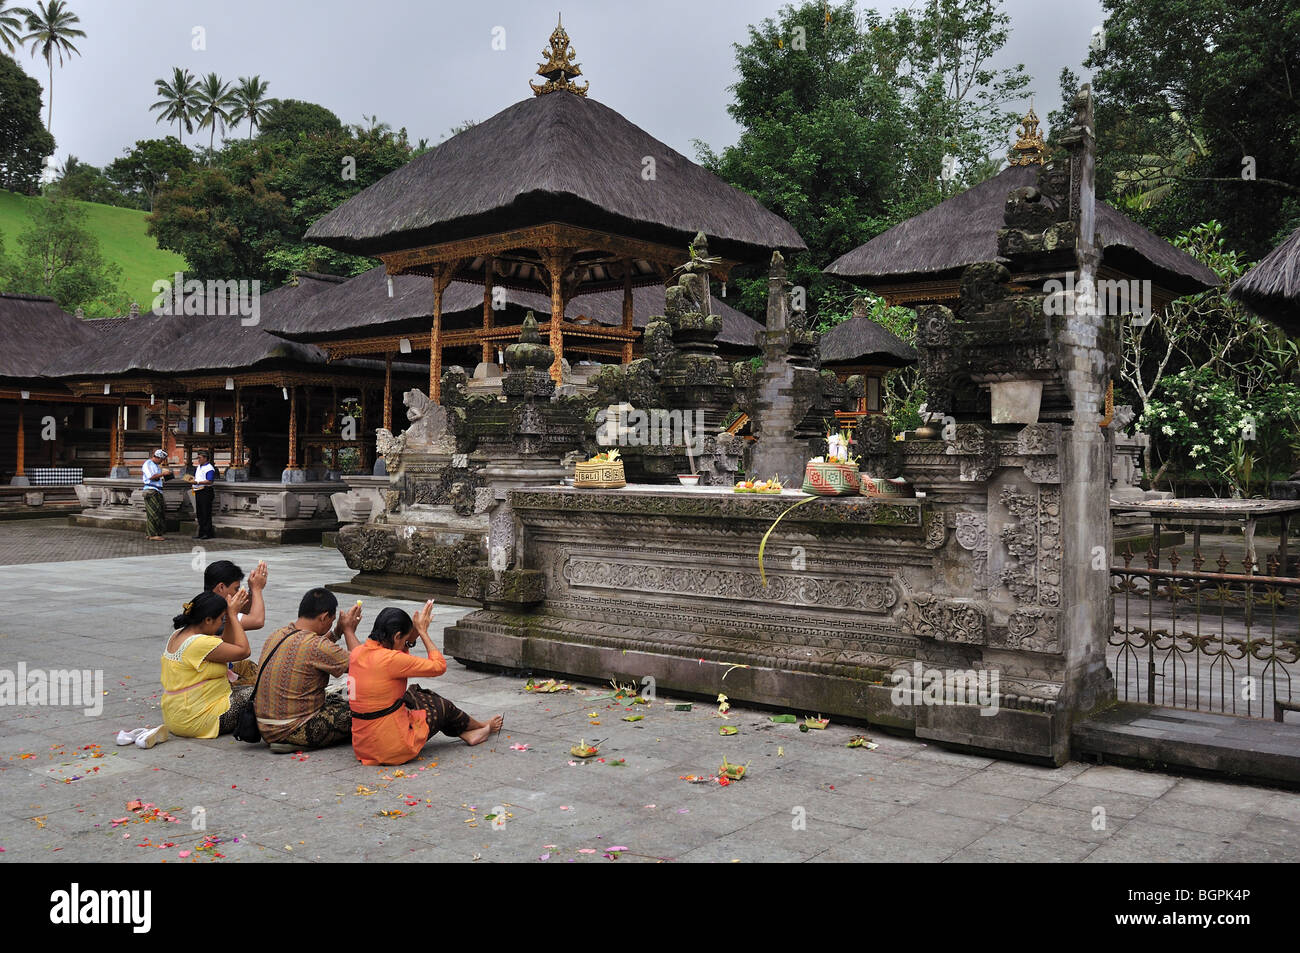 For more than a thousand years, Balinese worshipers have been drawn to Pura Tirta Empul, a sacred spring God Indra created Stock Photo